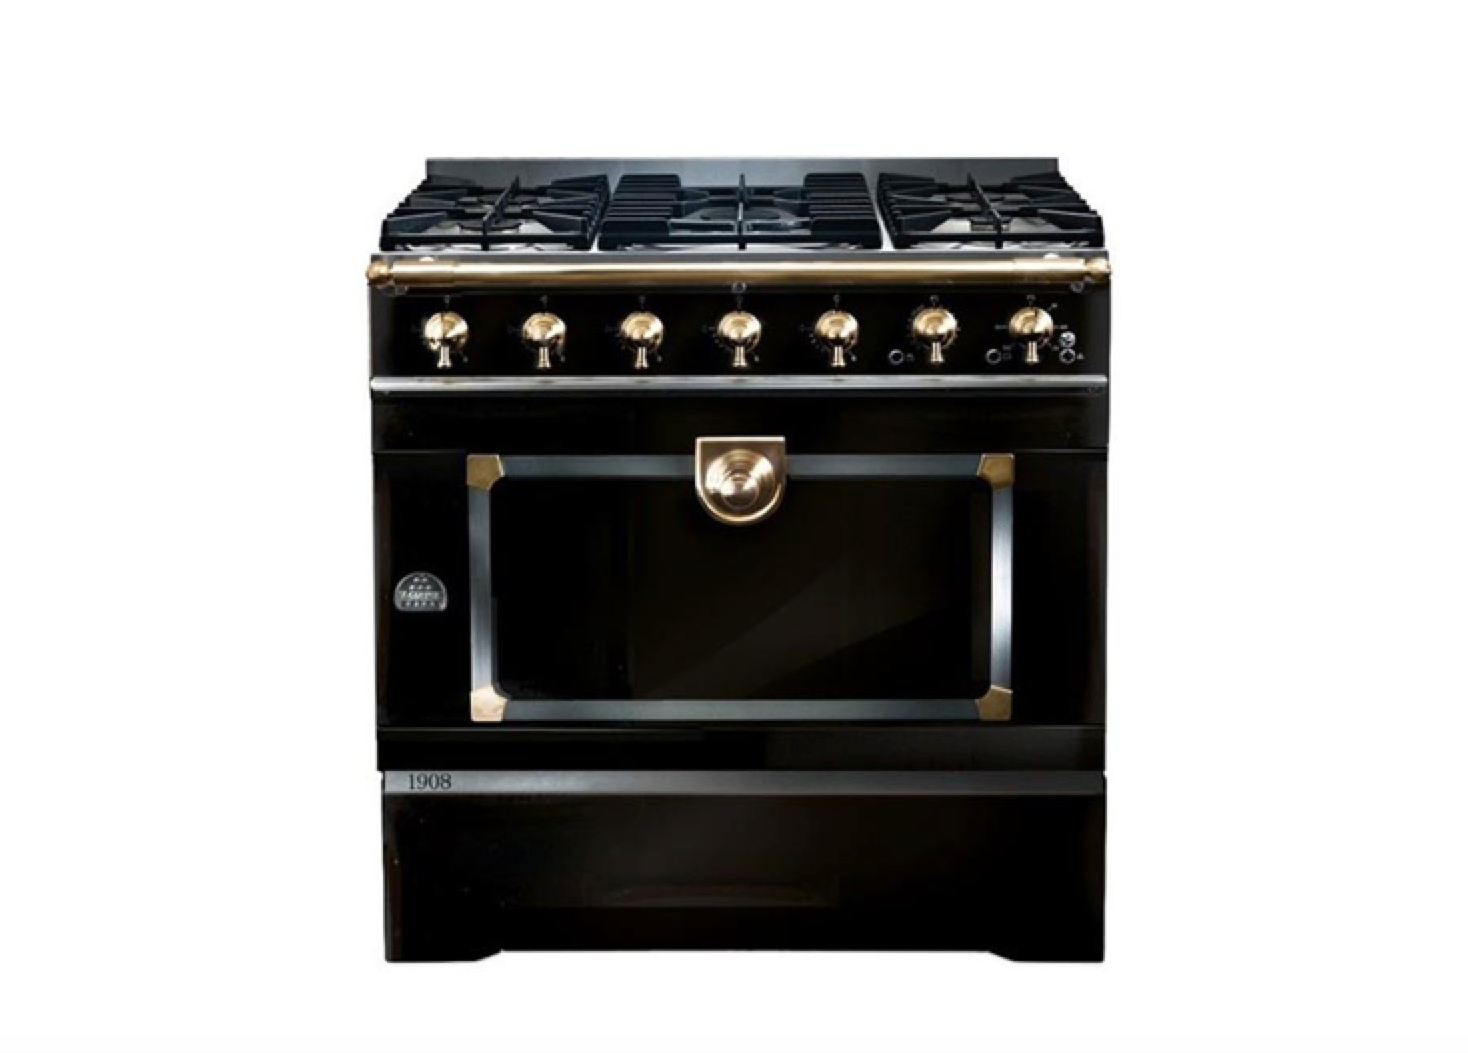 Remodeling 101: 8 Sources for Used High-End Appliances ...